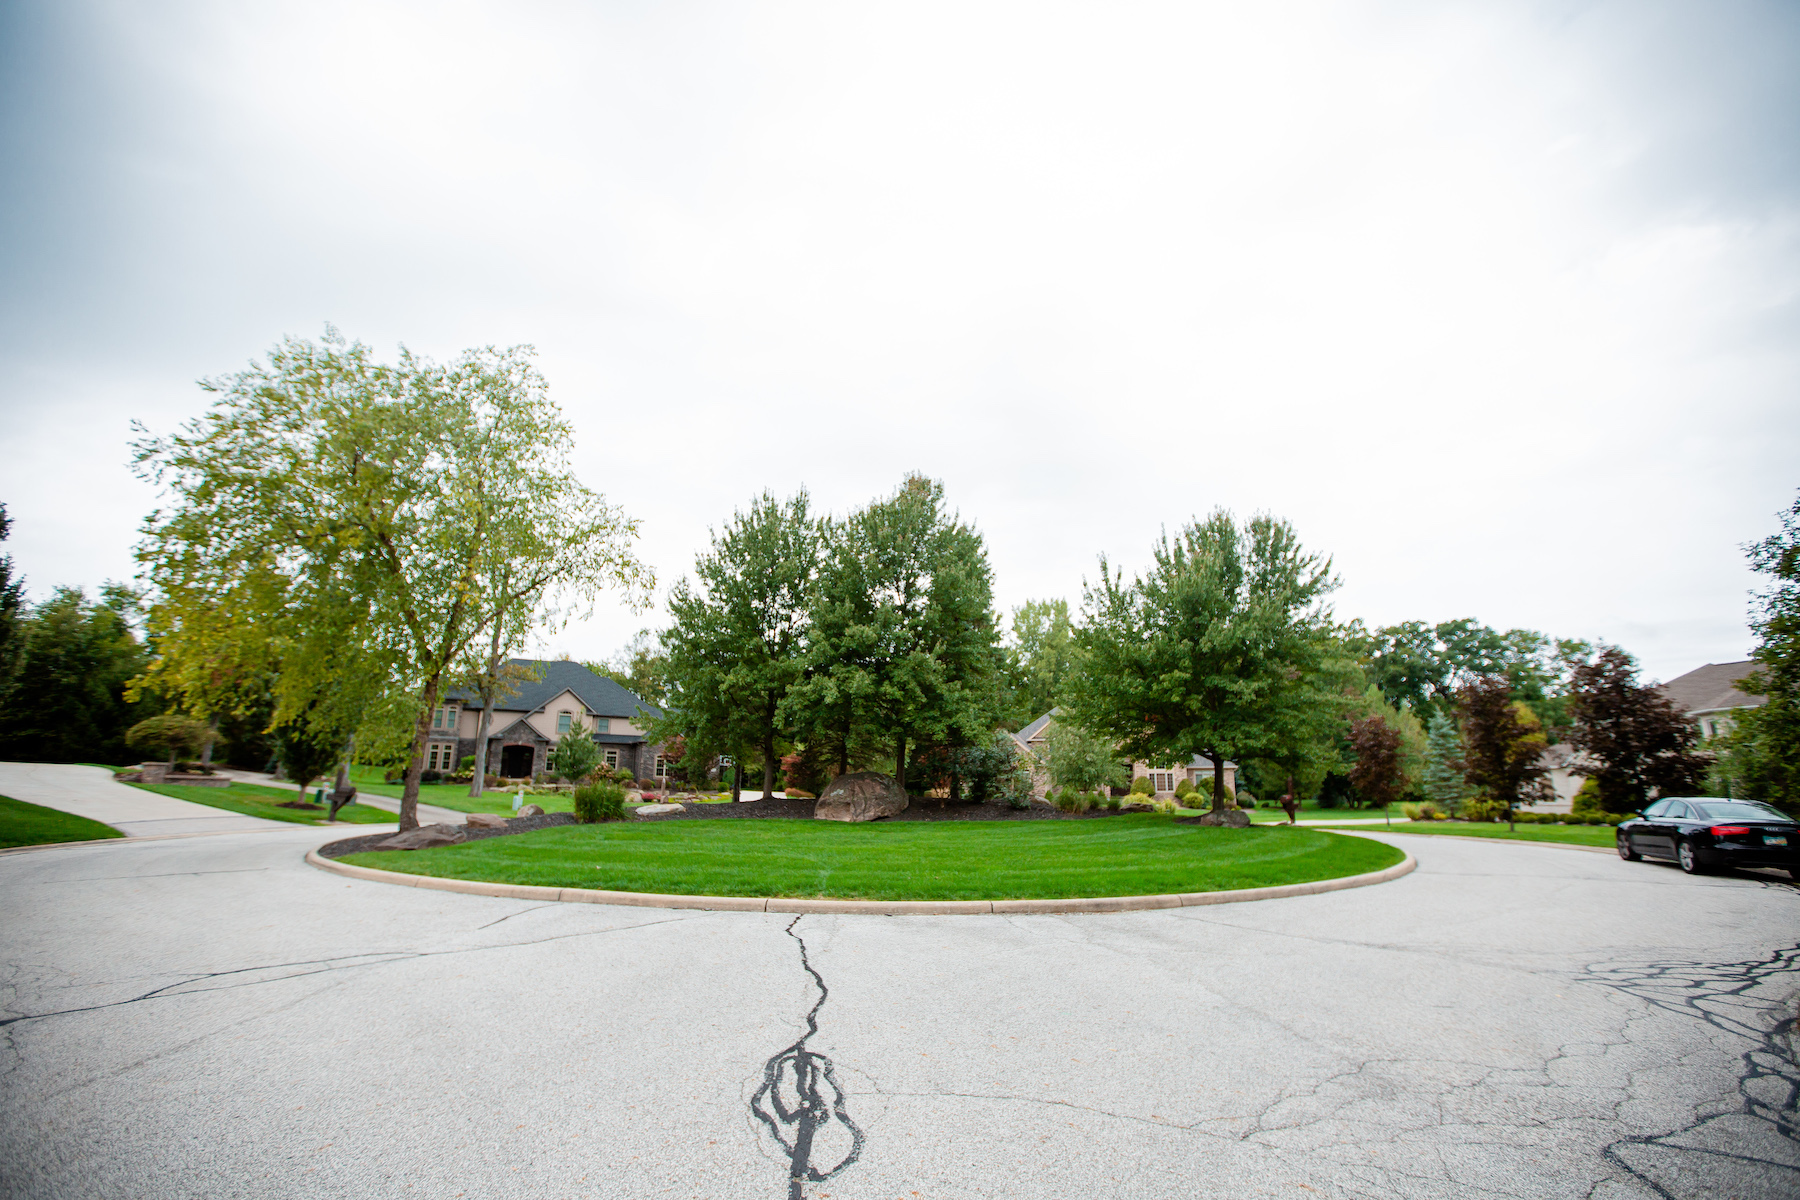 Condominium Landscaping in Cleveland and Northeast OH Case Study: Huntsford Farms